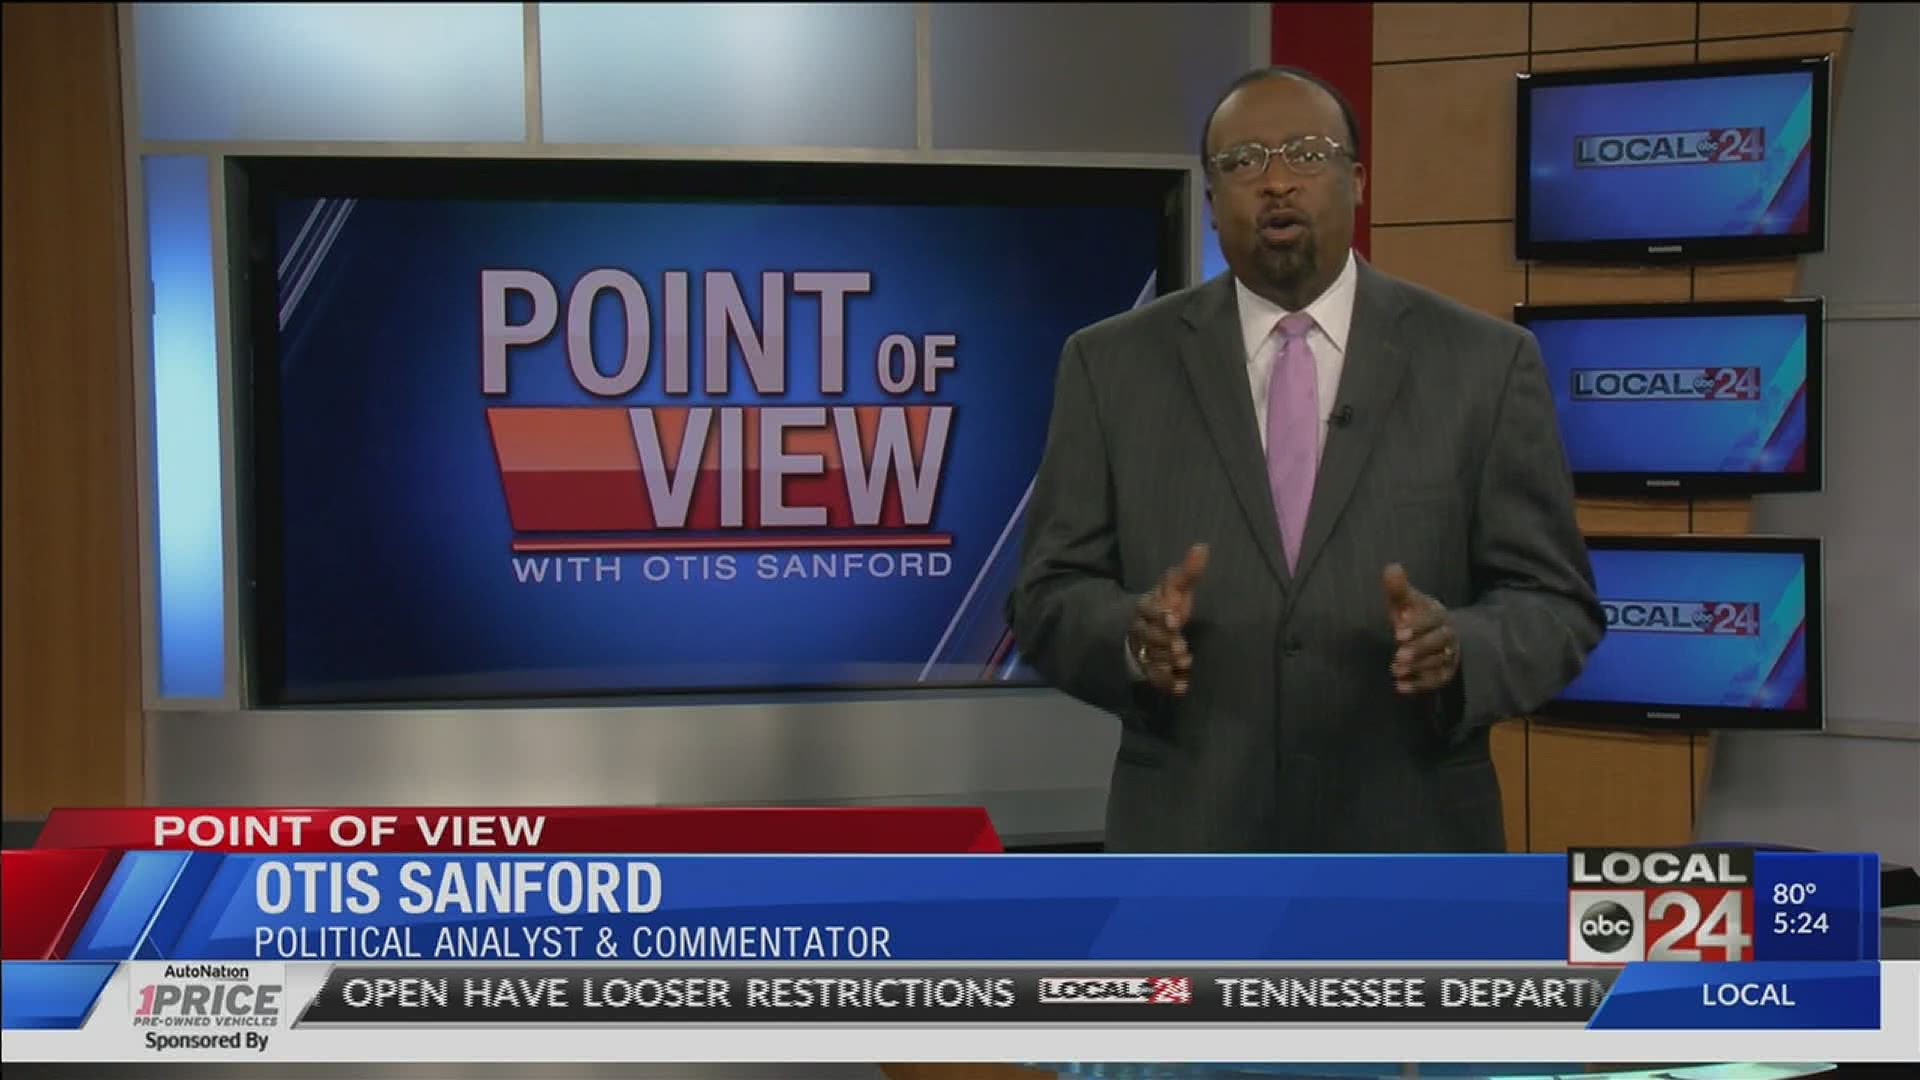 Local 24 News political analyst and commentator Otis Sanford shares his point of view on the overhaul of Tom Lee Park.